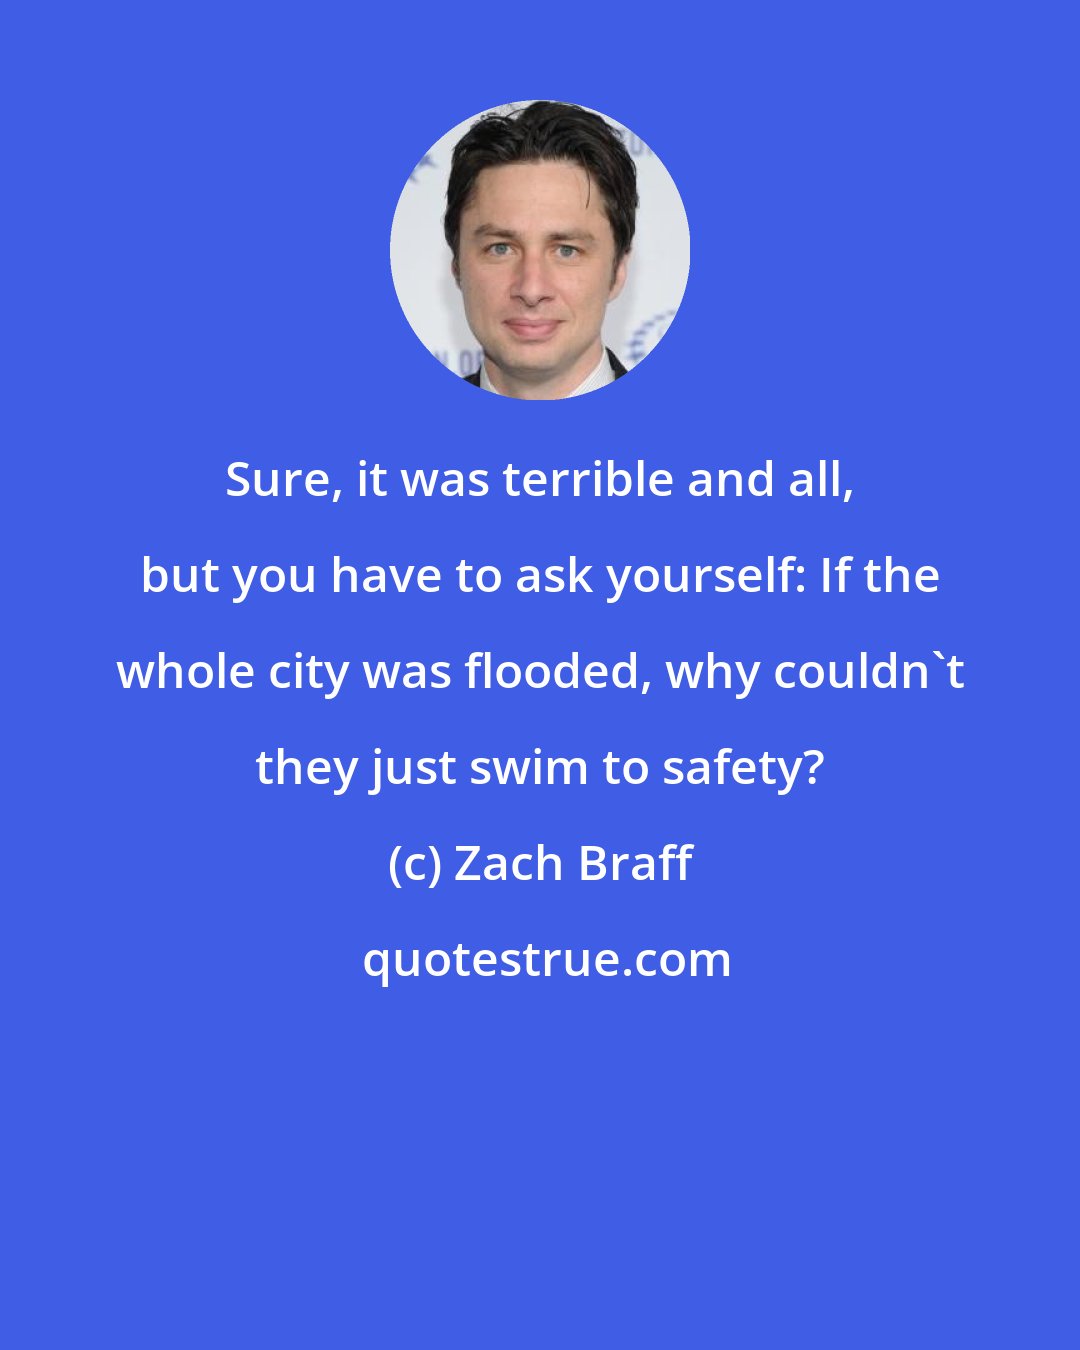 Zach Braff: Sure, it was terrible and all, but you have to ask yourself: If the whole city was flooded, why couldn't they just swim to safety?